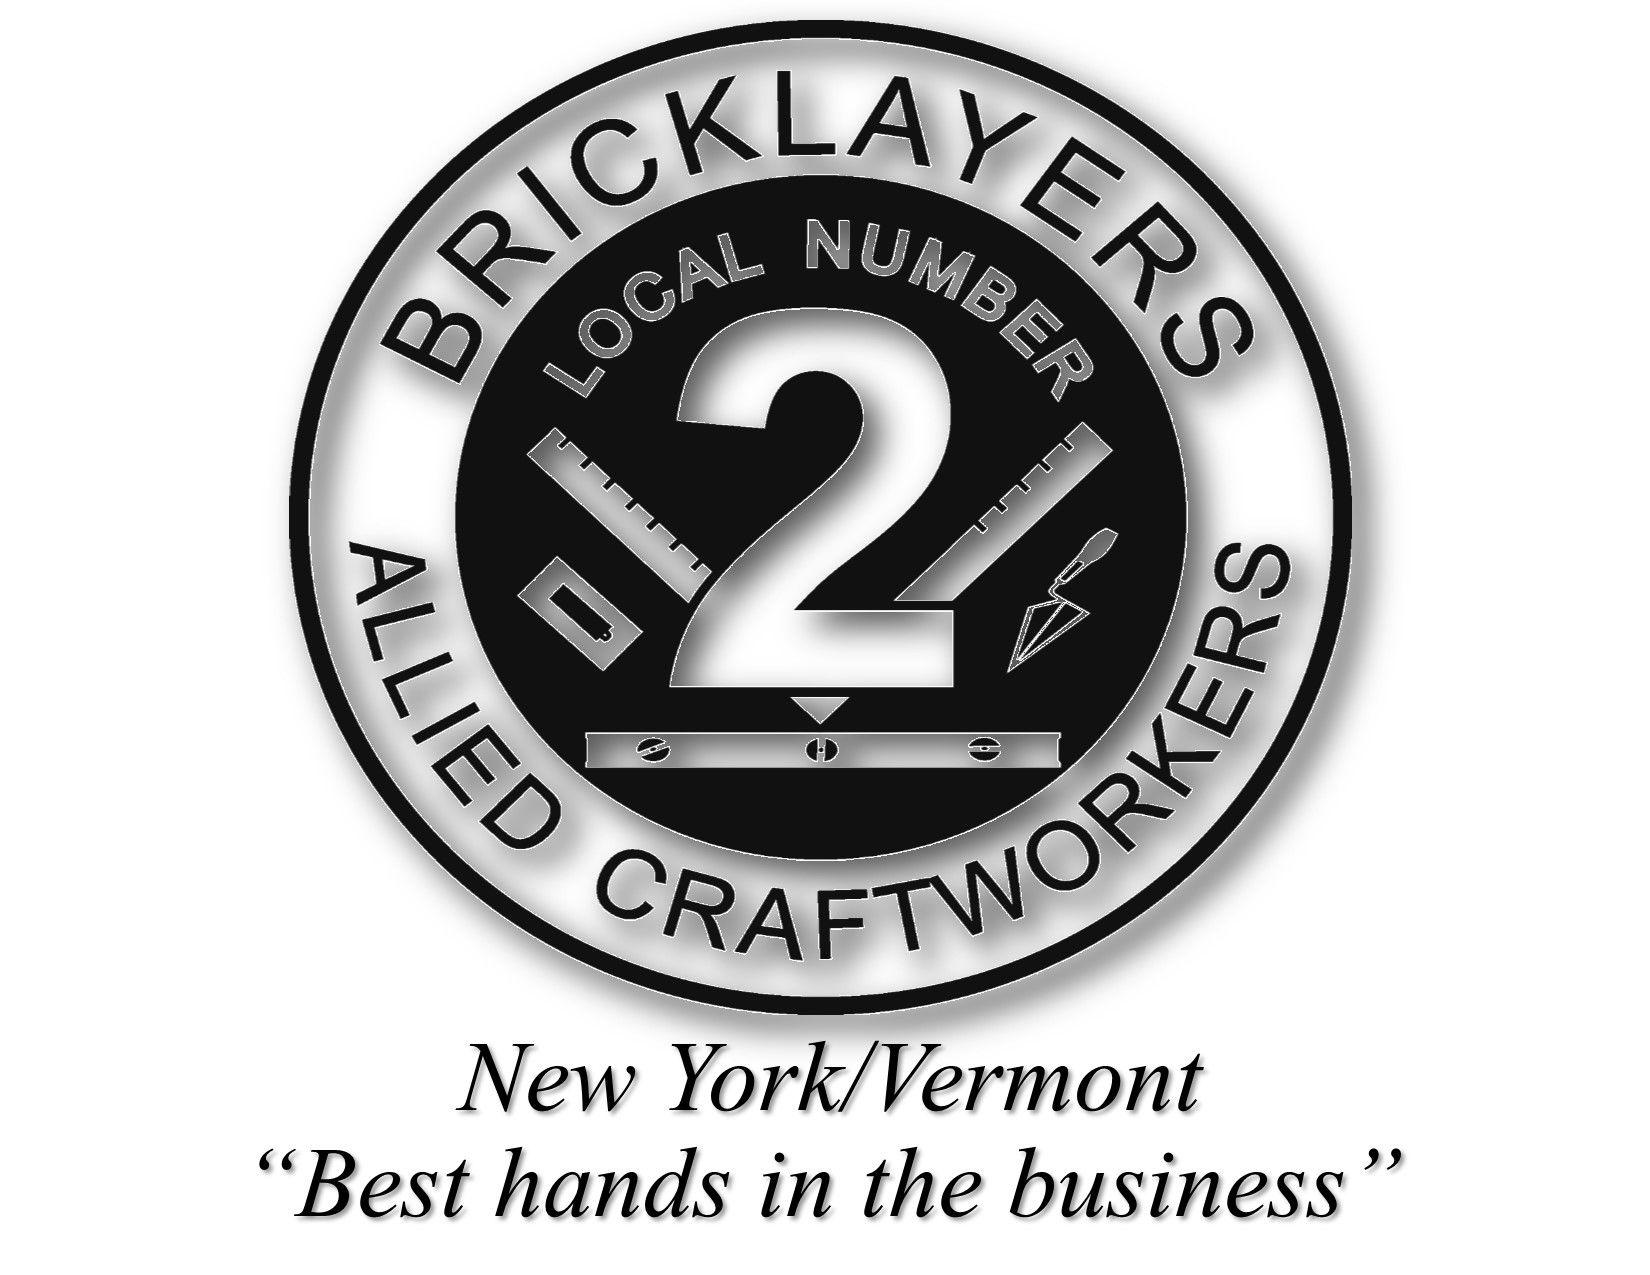 Vt-2 Logo - Bricklayers Allied Craftworkers Local 2 NY VT: About Us 2